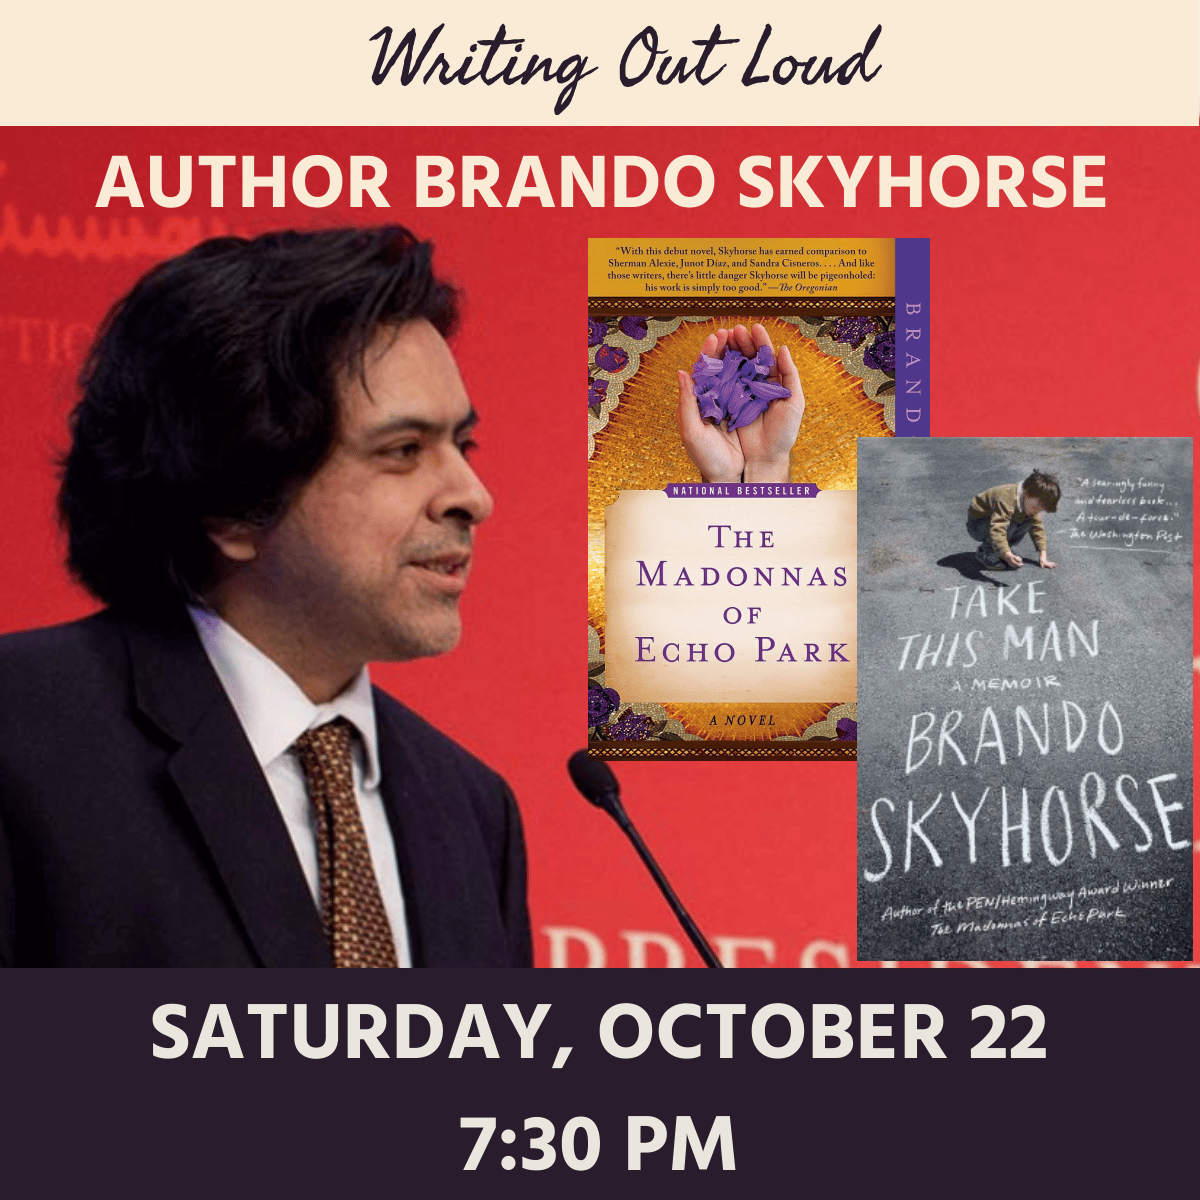 Writing Out Loud: author Brando Skyhorse, Saturday, October 22, 7:30 pm. Photo of author and book jackets for his books The Madonnas of Echo Park and Take This Man